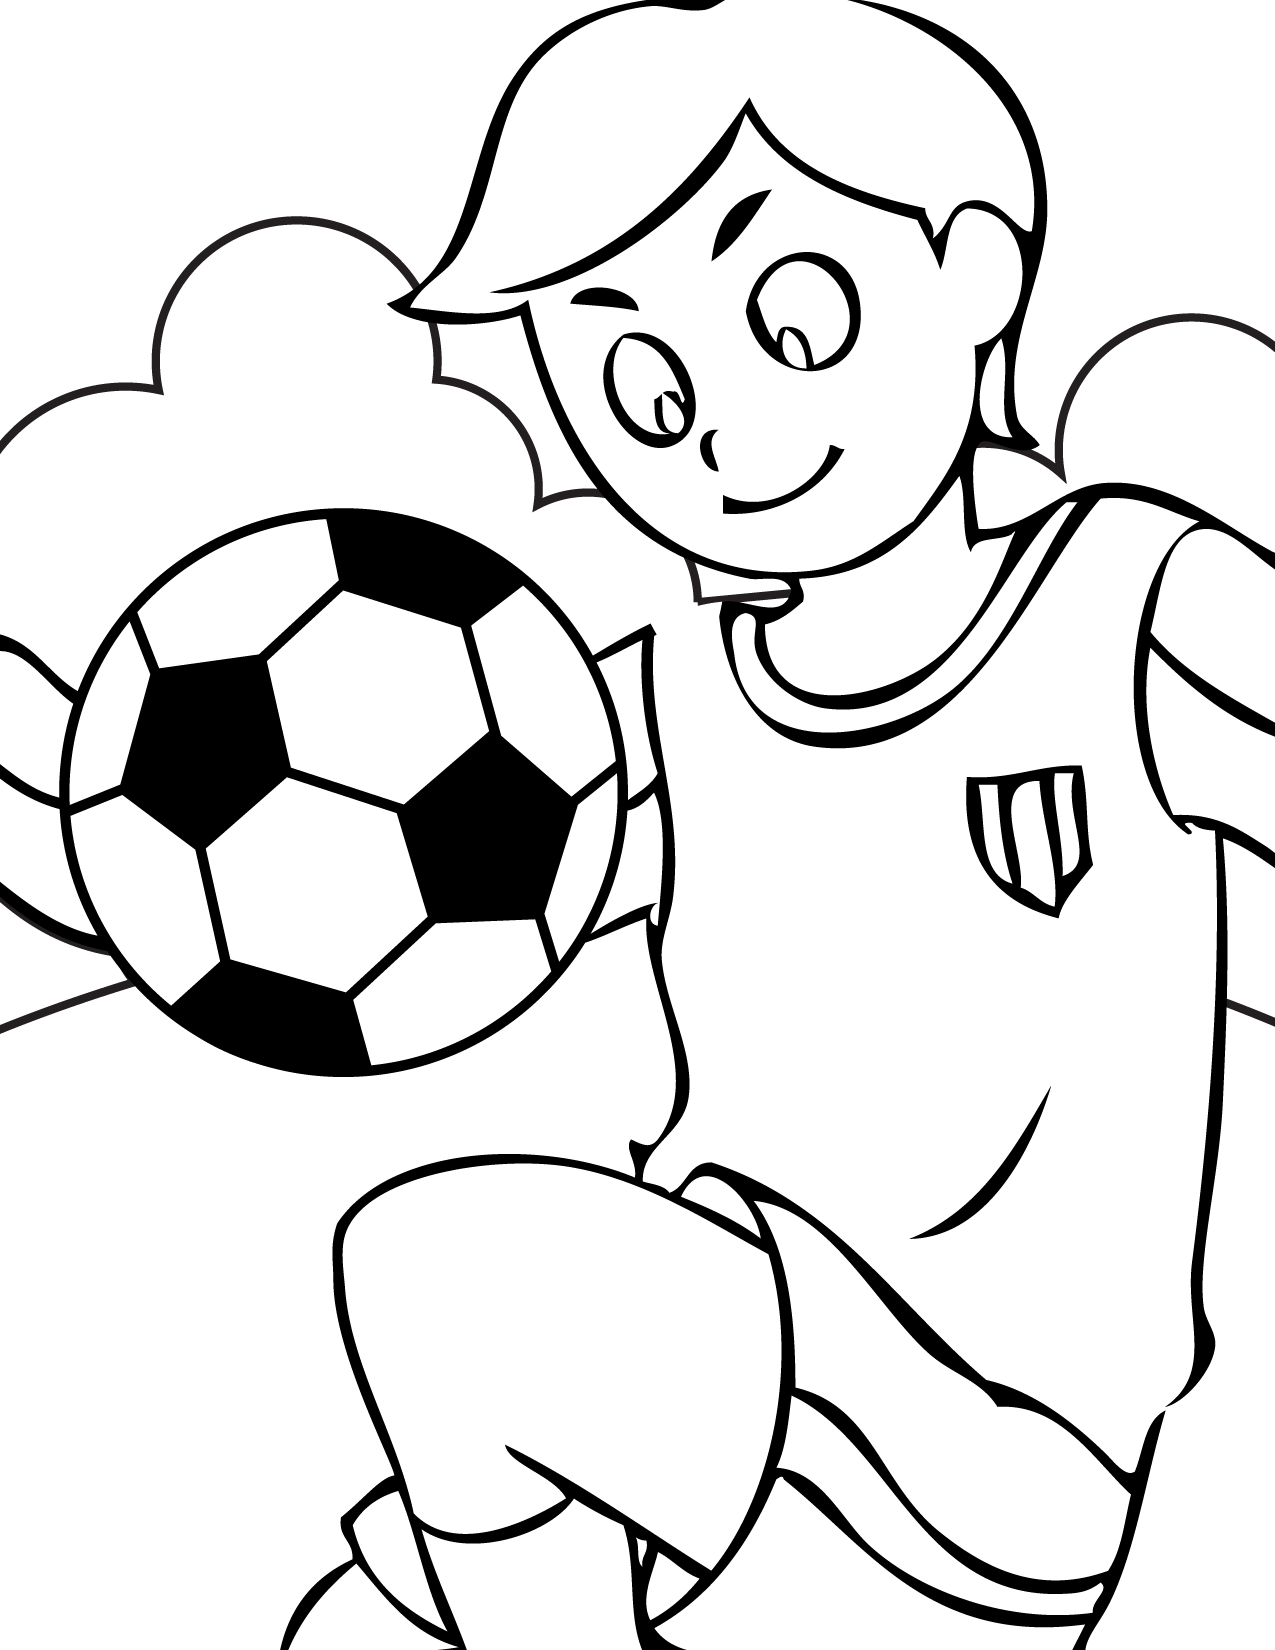 Free Teamwork Coloring Pages, Download Free Teamwork Coloring ...